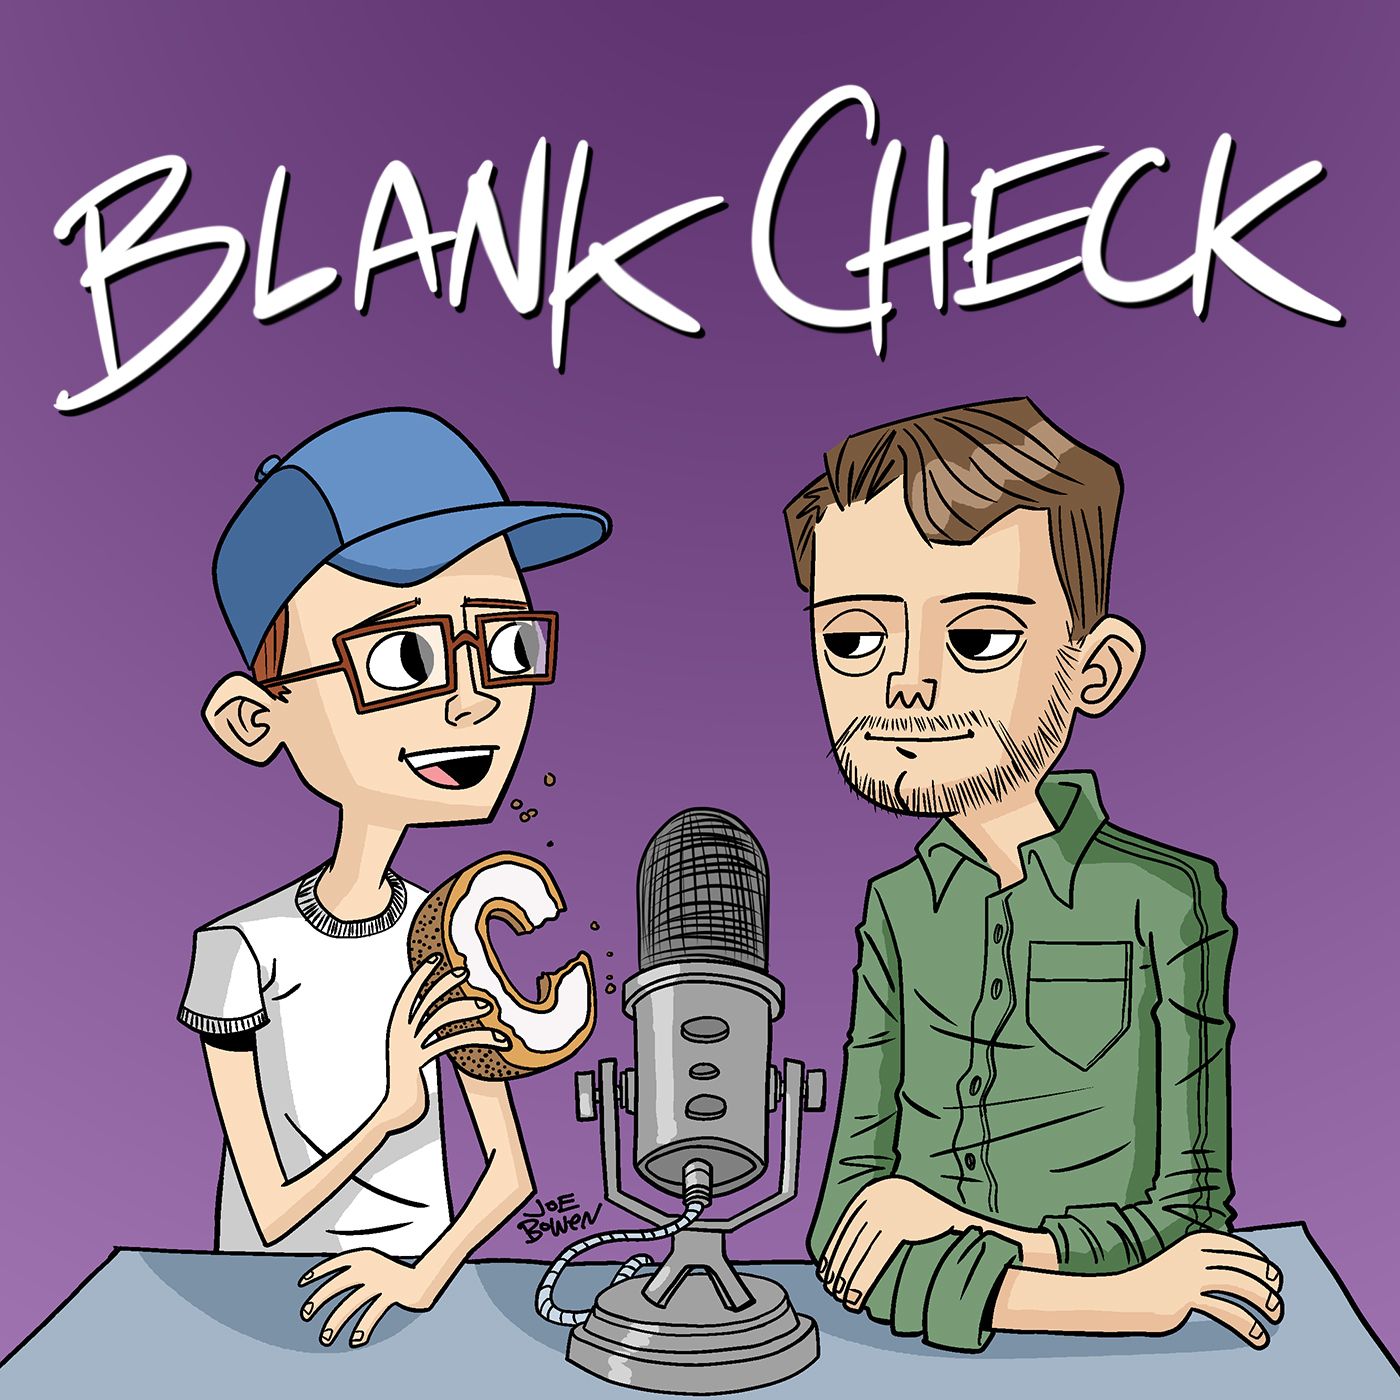 Blank Check with Griffin & David podcast